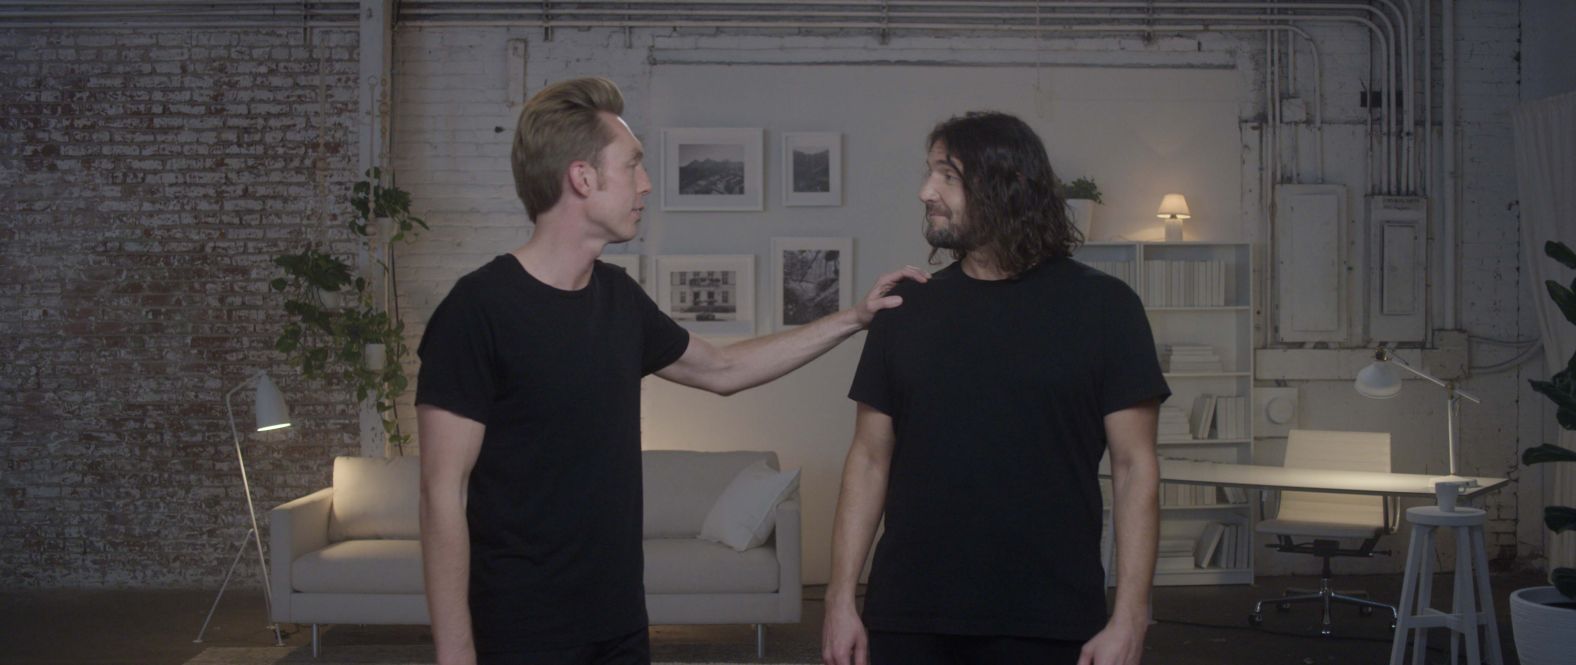 <strong>"The Minimalists: Less is Now"</strong>: They've built a movement out of minimalism. Longtime friends Joshua Fields Millburn and Ryan Nicodemus share how our lives can be better with less in this documentary. <strong>(Netflix) </strong><br />